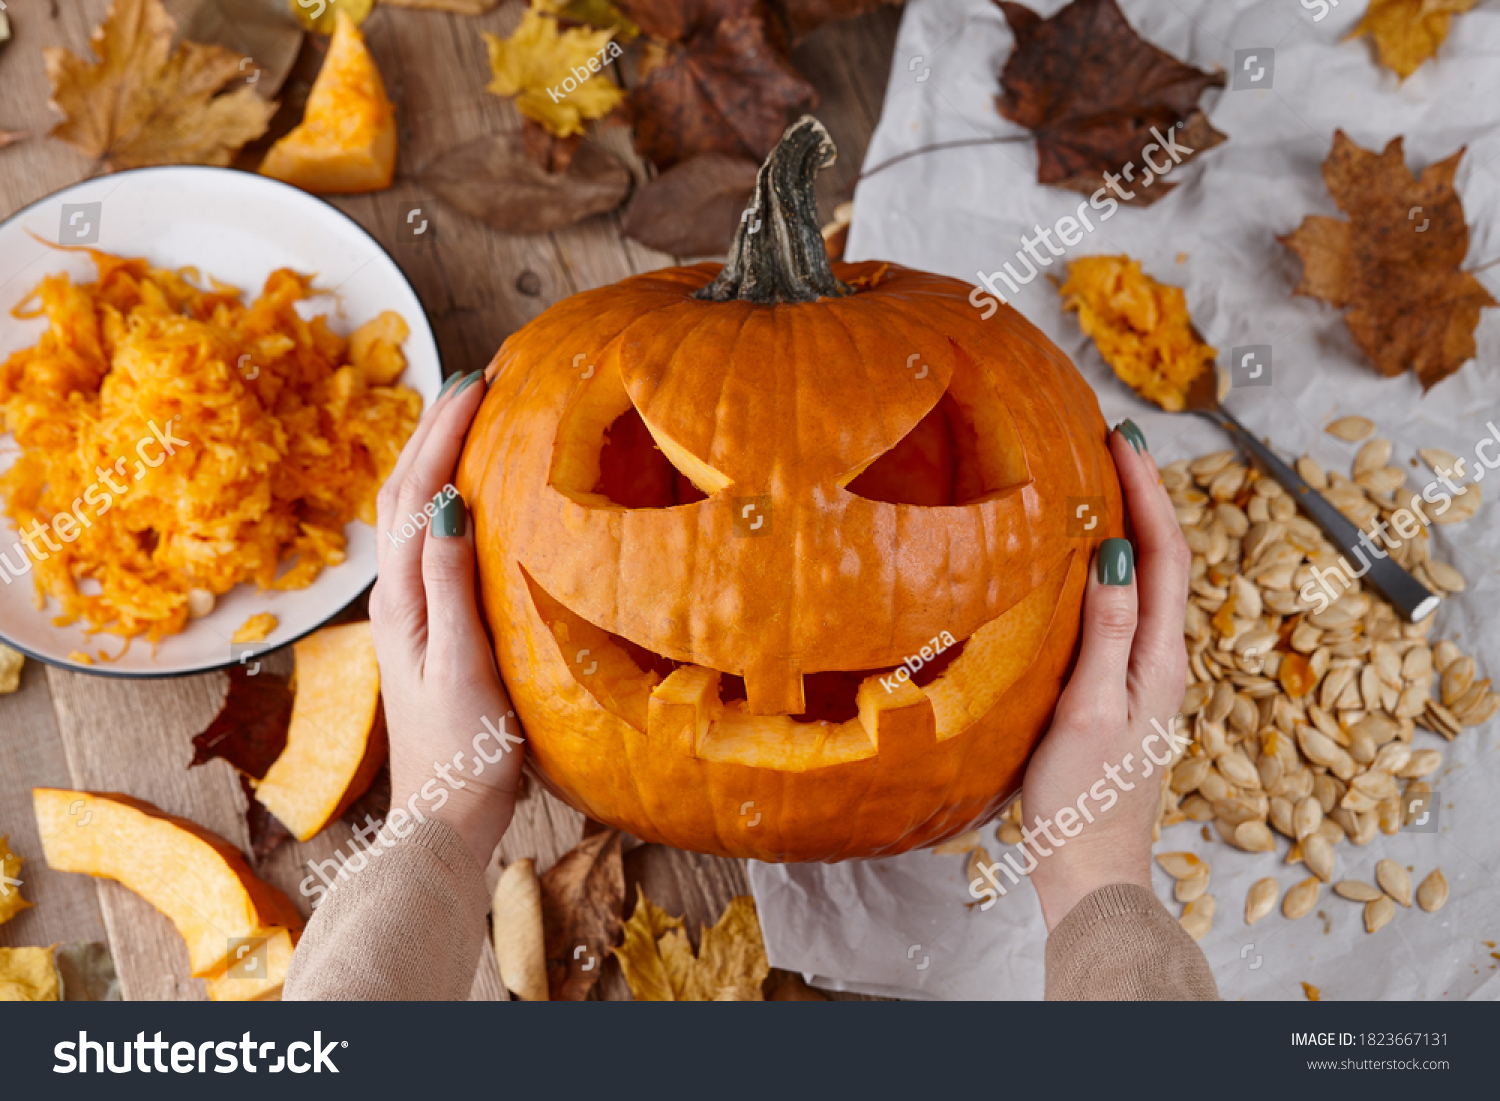 Making scary pumpkin jack for Halloween, holiday preparation #1823667131